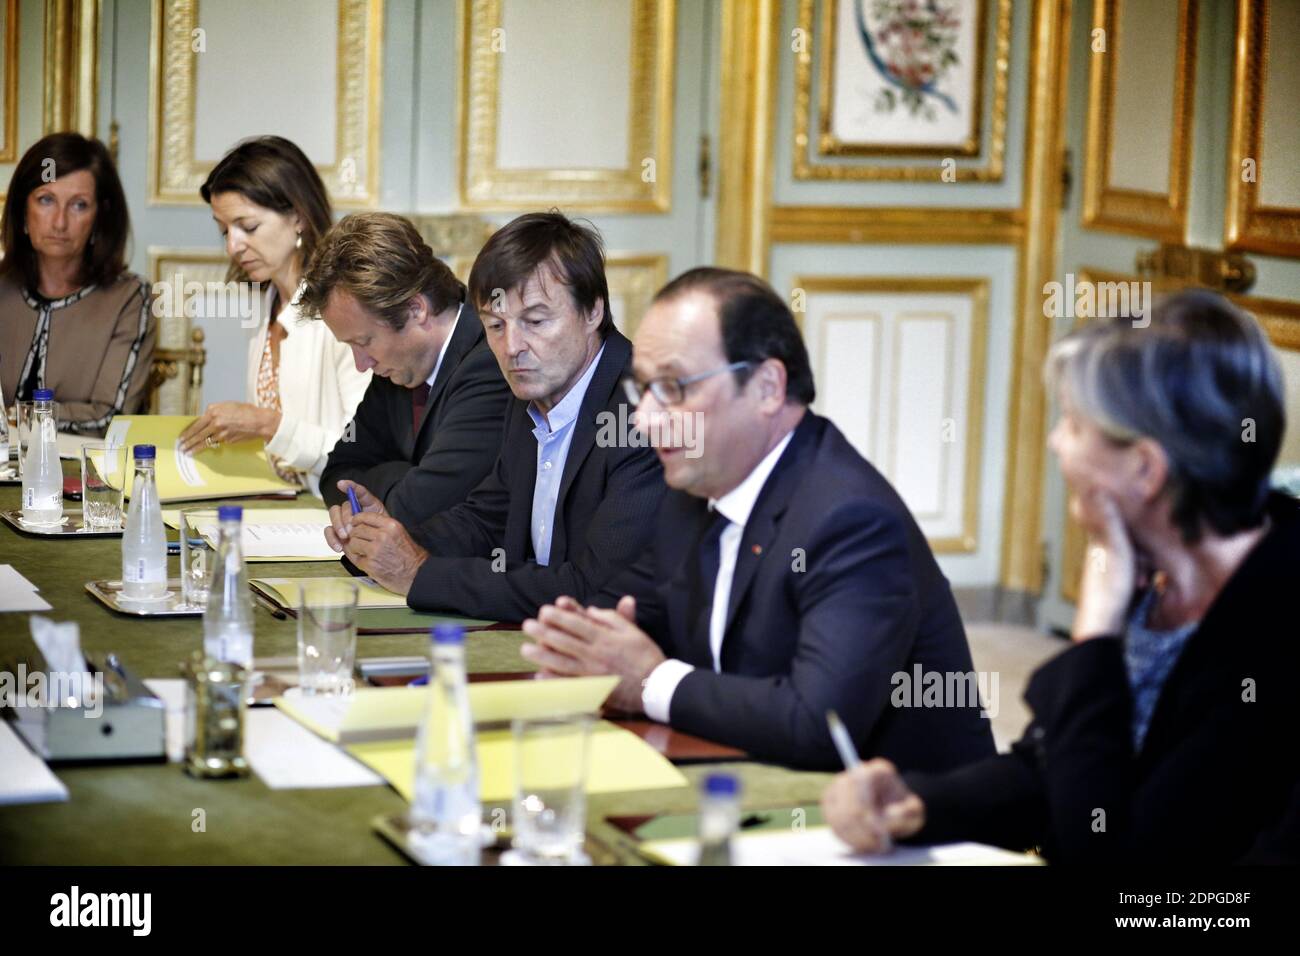 French President Francois Hollande (2nd R) presides over a ministerial meeting including Prime Minister Manuel Valls, Minister of Ecology, Sustainable Development and Energy Segolene Royal, Minister of Foreign Affairs and International Development Laurent Fabius, environmental activist and President Hollande's special envoy for the protection of the planet Nicolas Hulot (3rd R), Deputy Secretary General of the French Presidency Boris Vallaud (4th R) and COP21 special representative Laurence Tubiana (R), in preparation for the COP21 Climate Conference to be held in Paris in December 2015, at th Stock Photo